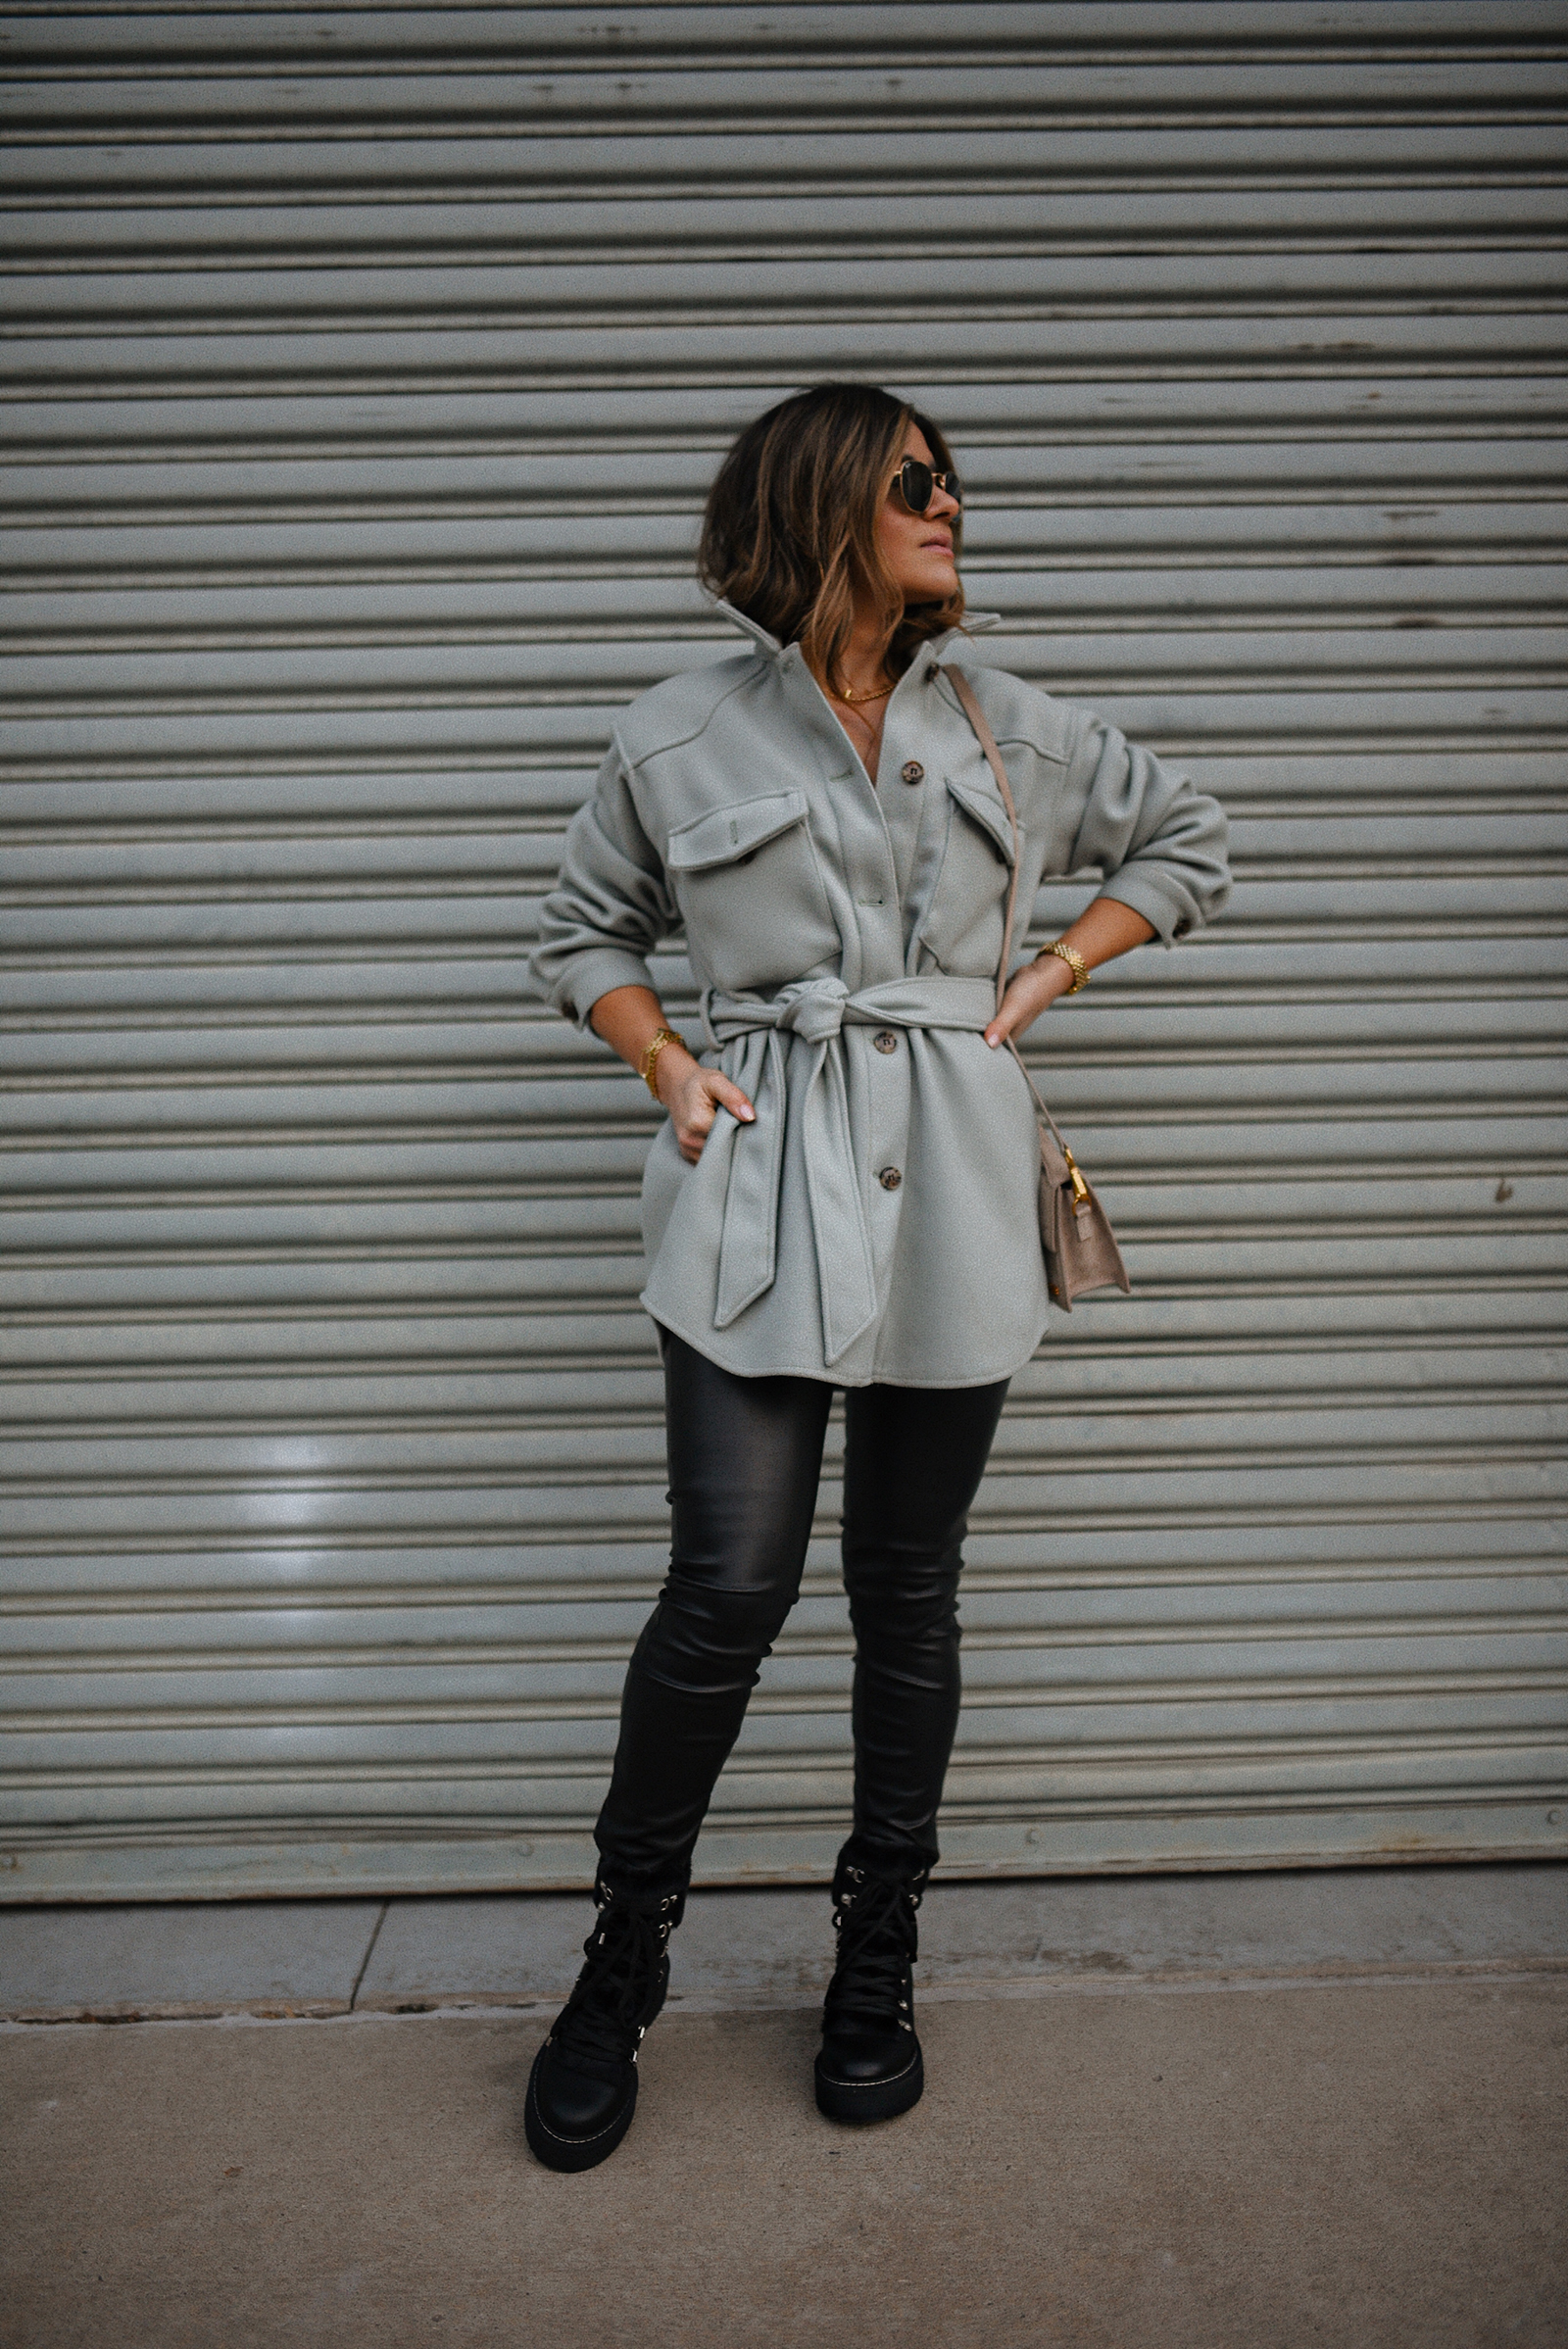 Carolina Hellal of Chic Talk wearing a shacket, faux leather pants and combat boots. 